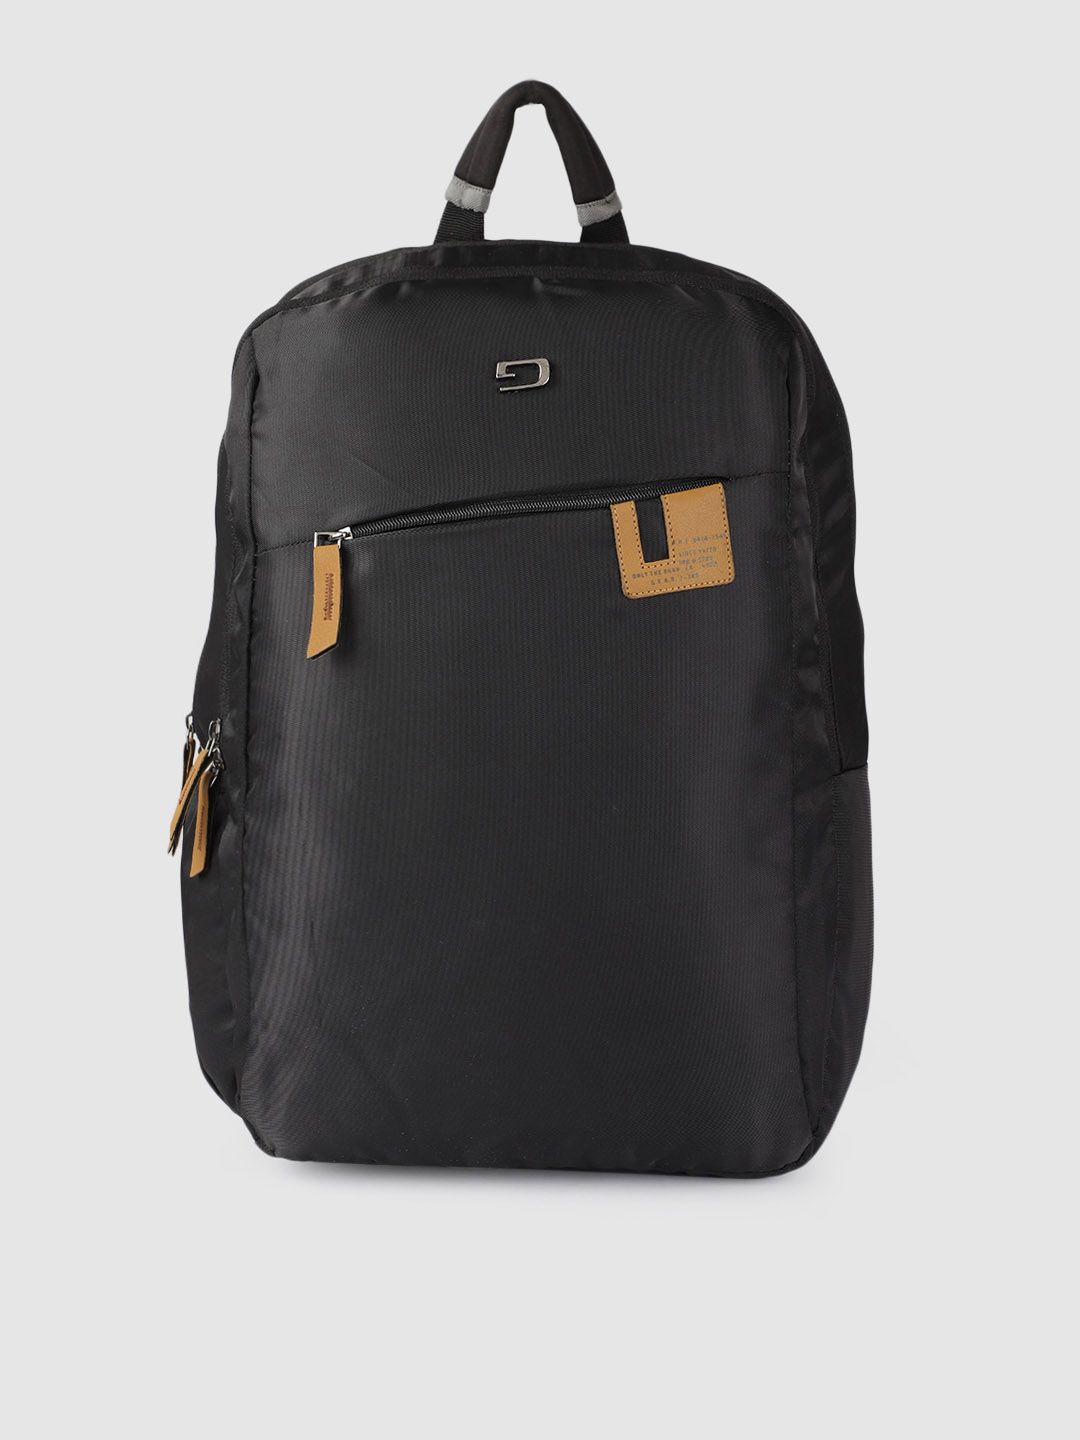 Gear Unisex Black Solid Backpack Price in India